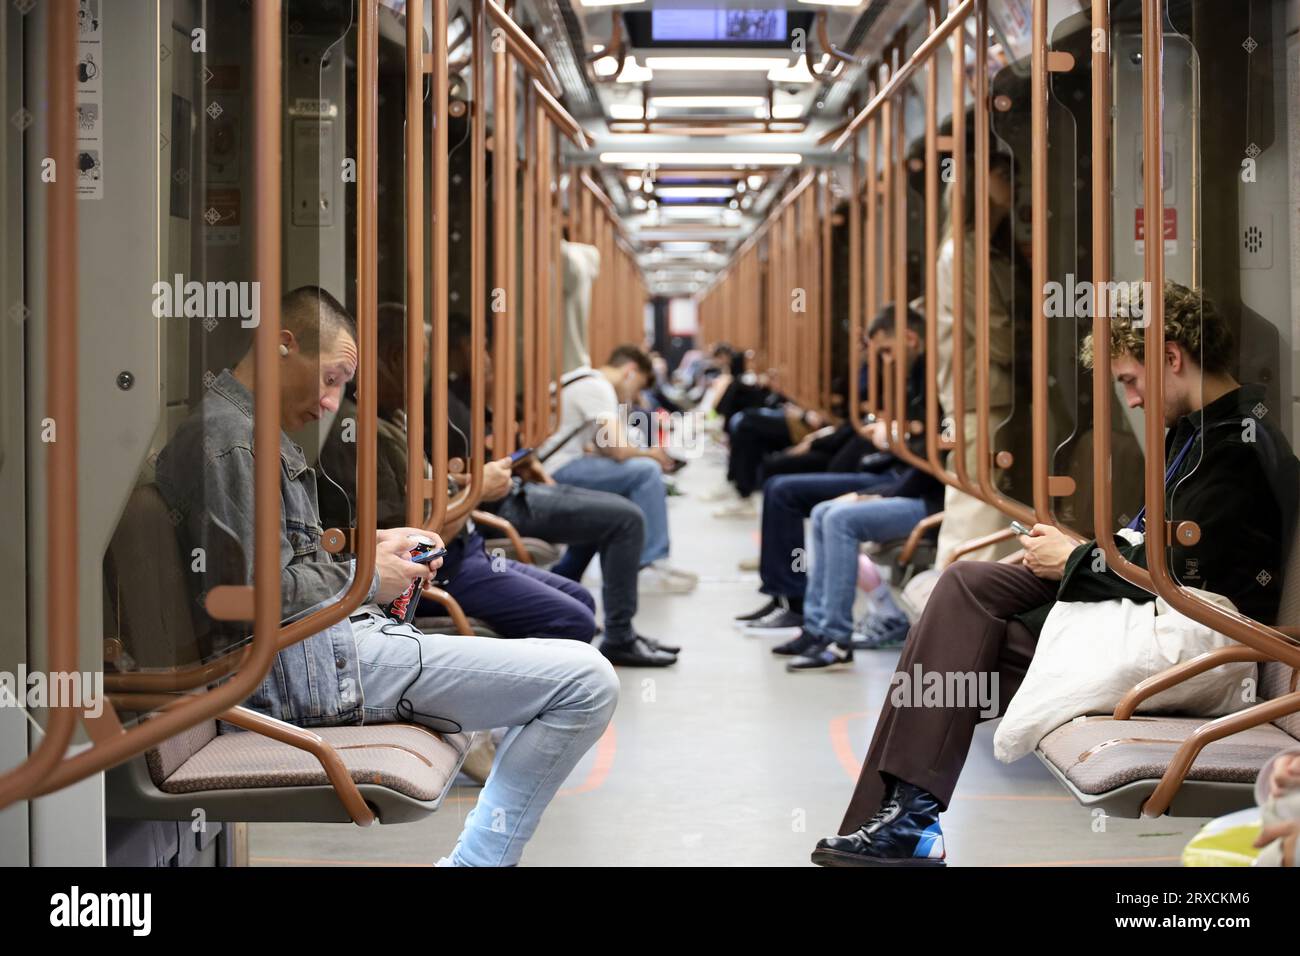 People in a metro train, guys sit with smartphone in the foreground. Interior of modern subway car Stock Photo